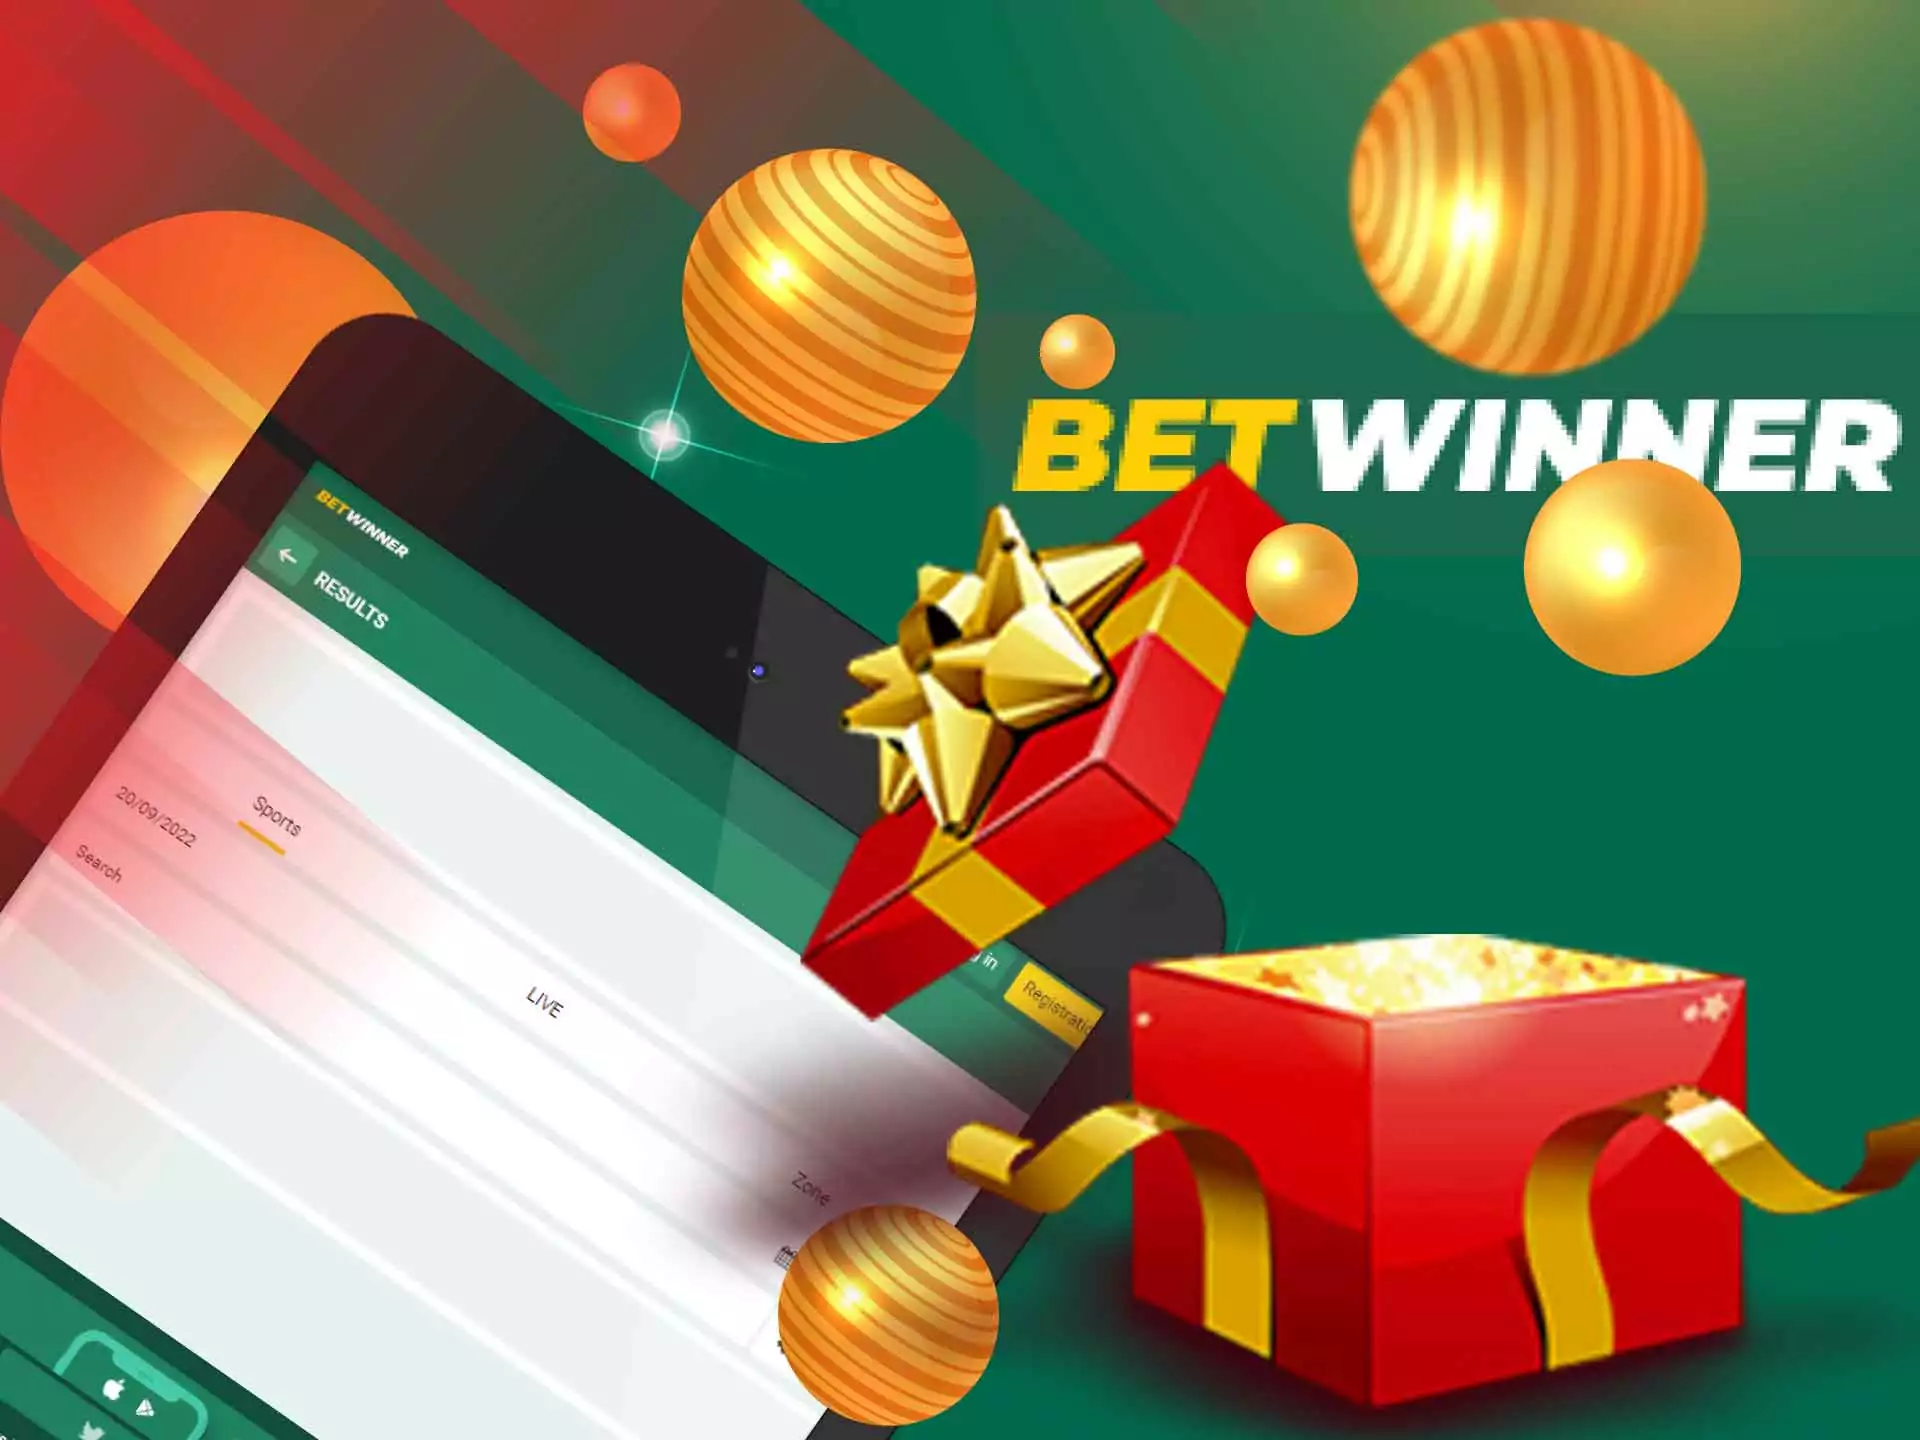 Watch all the results and statistics in the specific section at Betwinner.